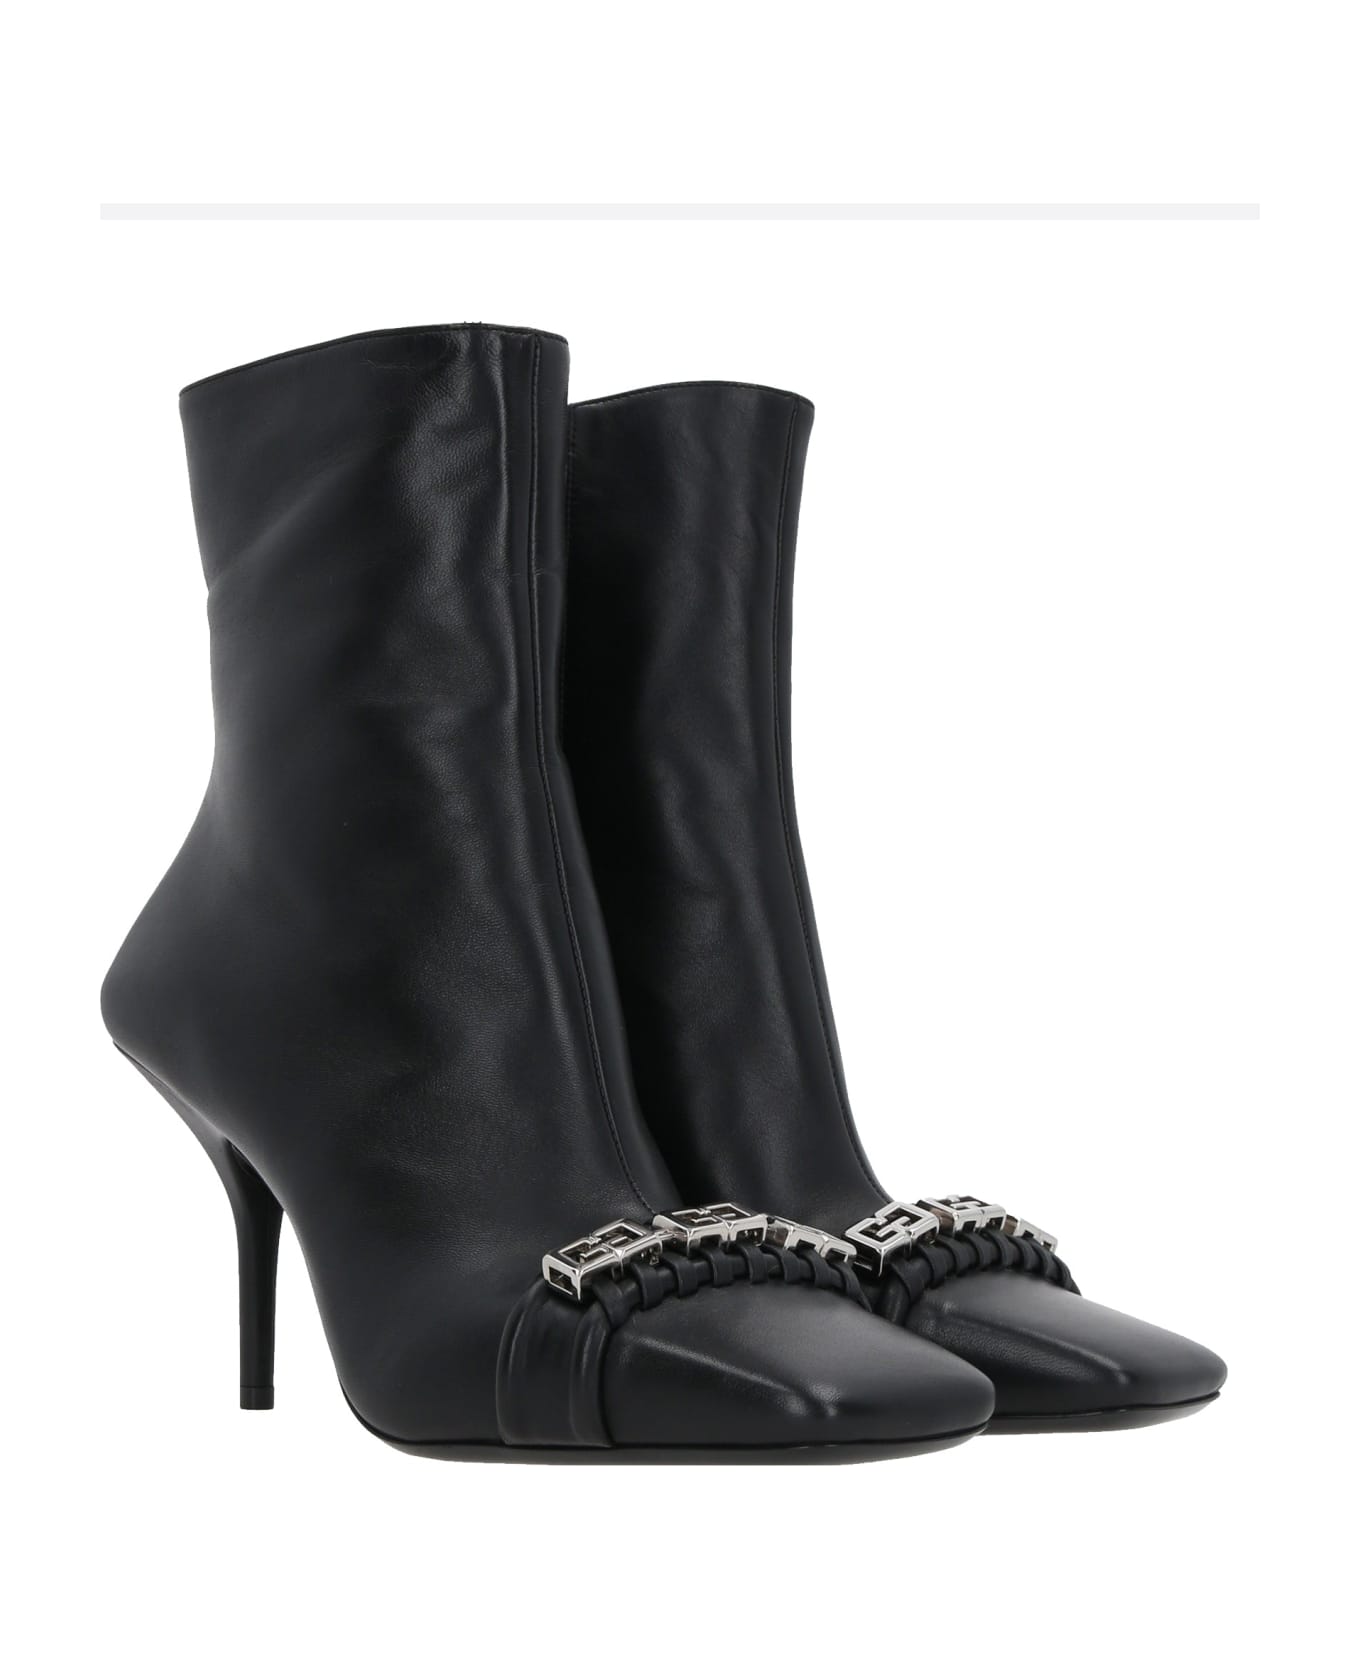 Givenchy Leather Boots - Black ブーツ